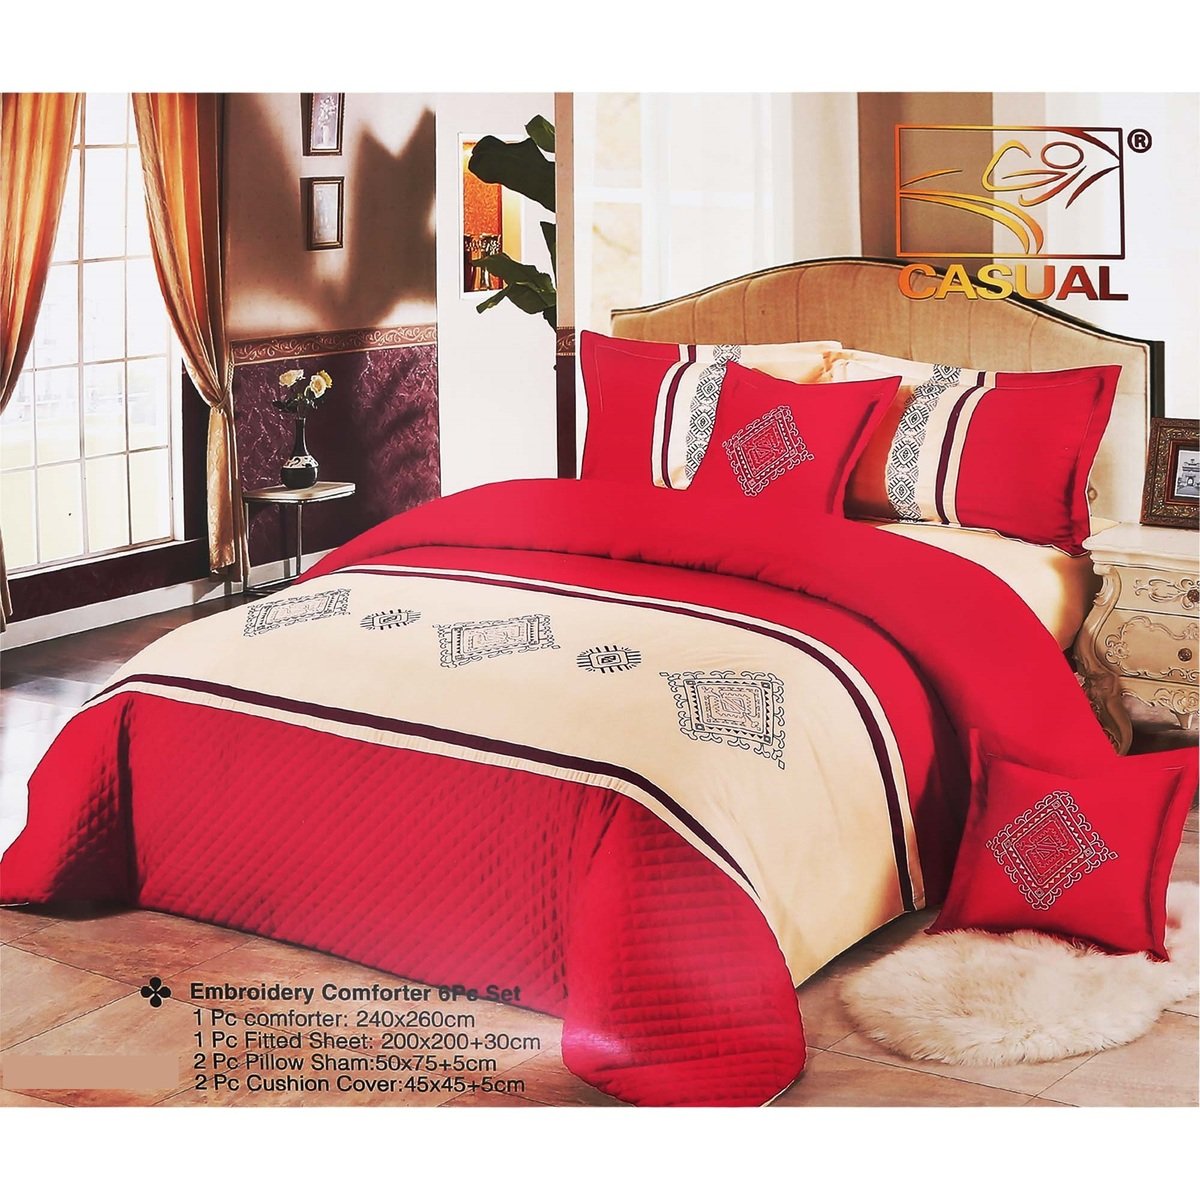 Casual Comforter 6pcs Set Embroidery Assorted Colors & Designs